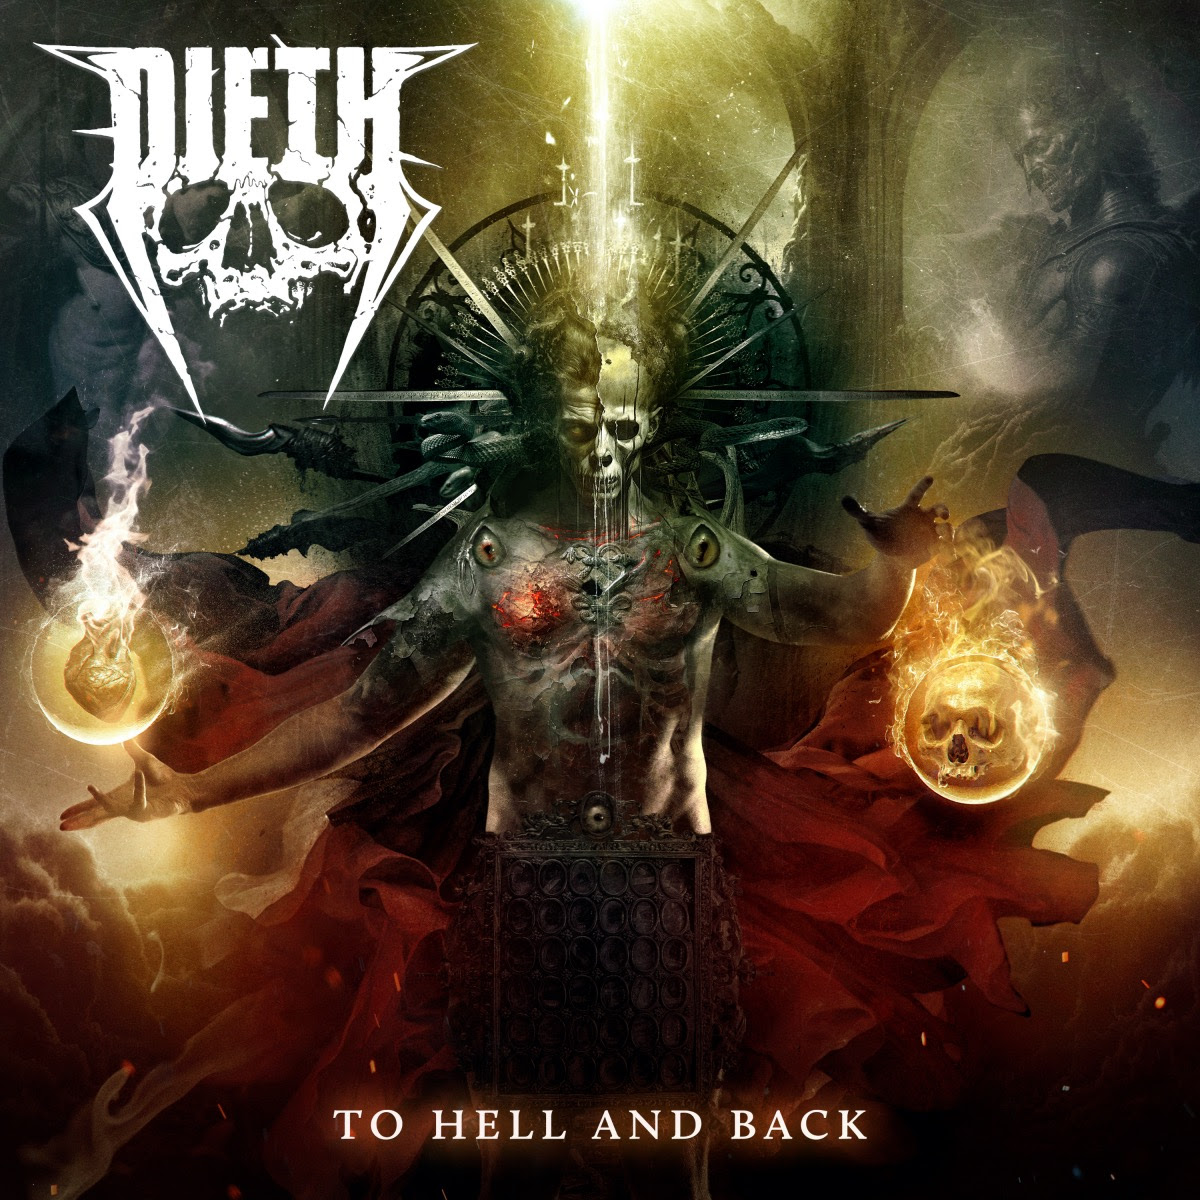 DEBUT ALBUM REVIEW: To Hell and Back by Dieth